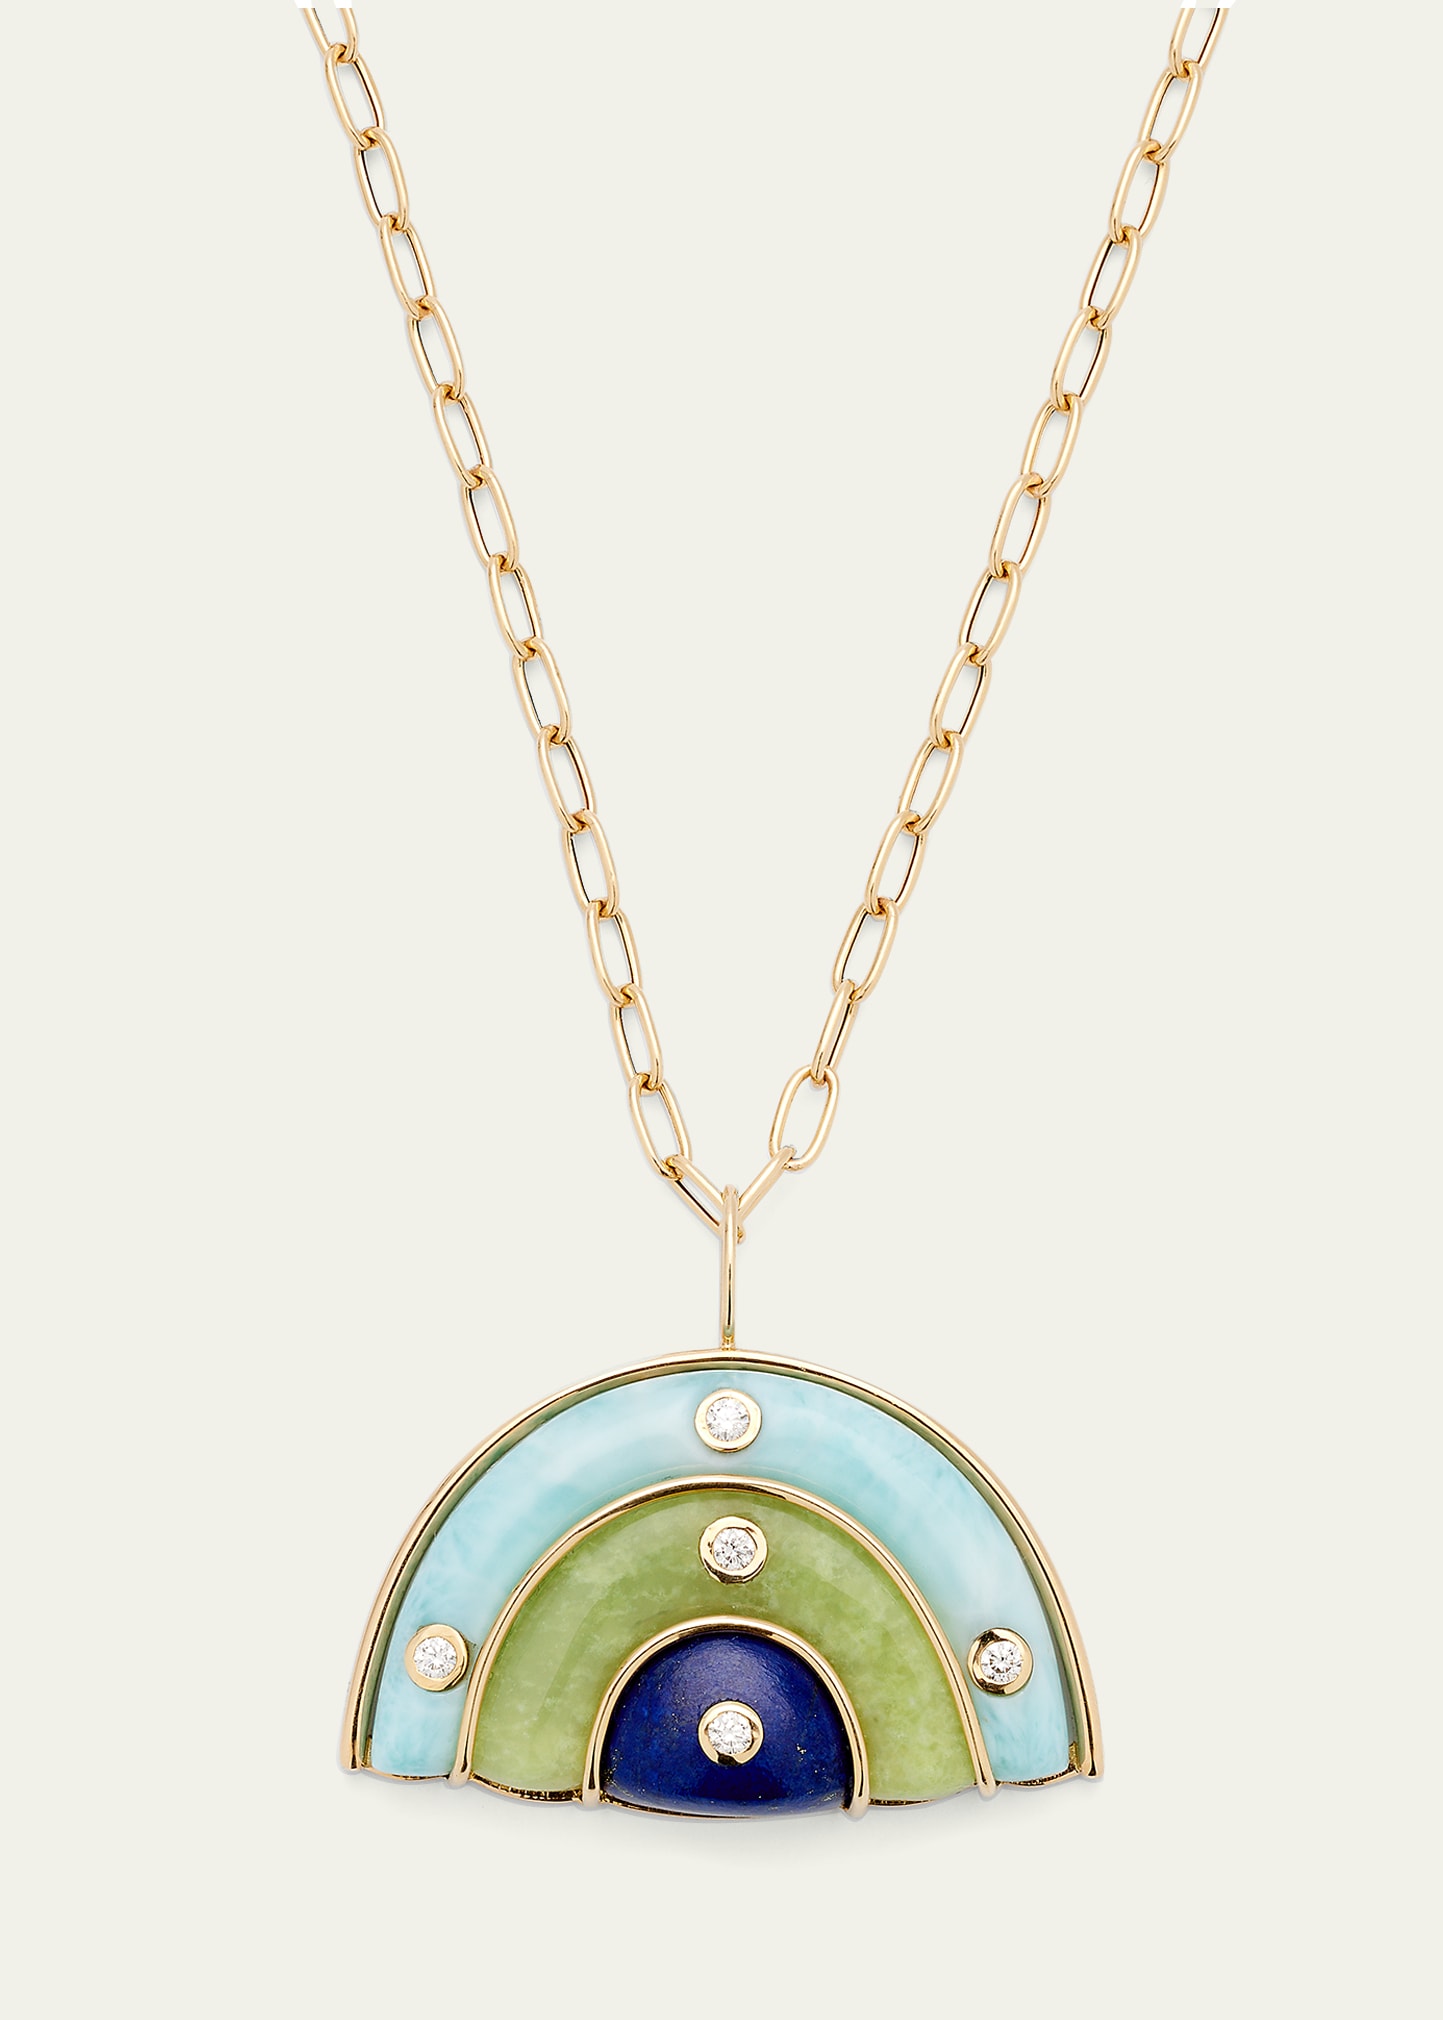 Brent Neale Medium Marianne Necklace in Larimar, Brazilian Opal and Lapis